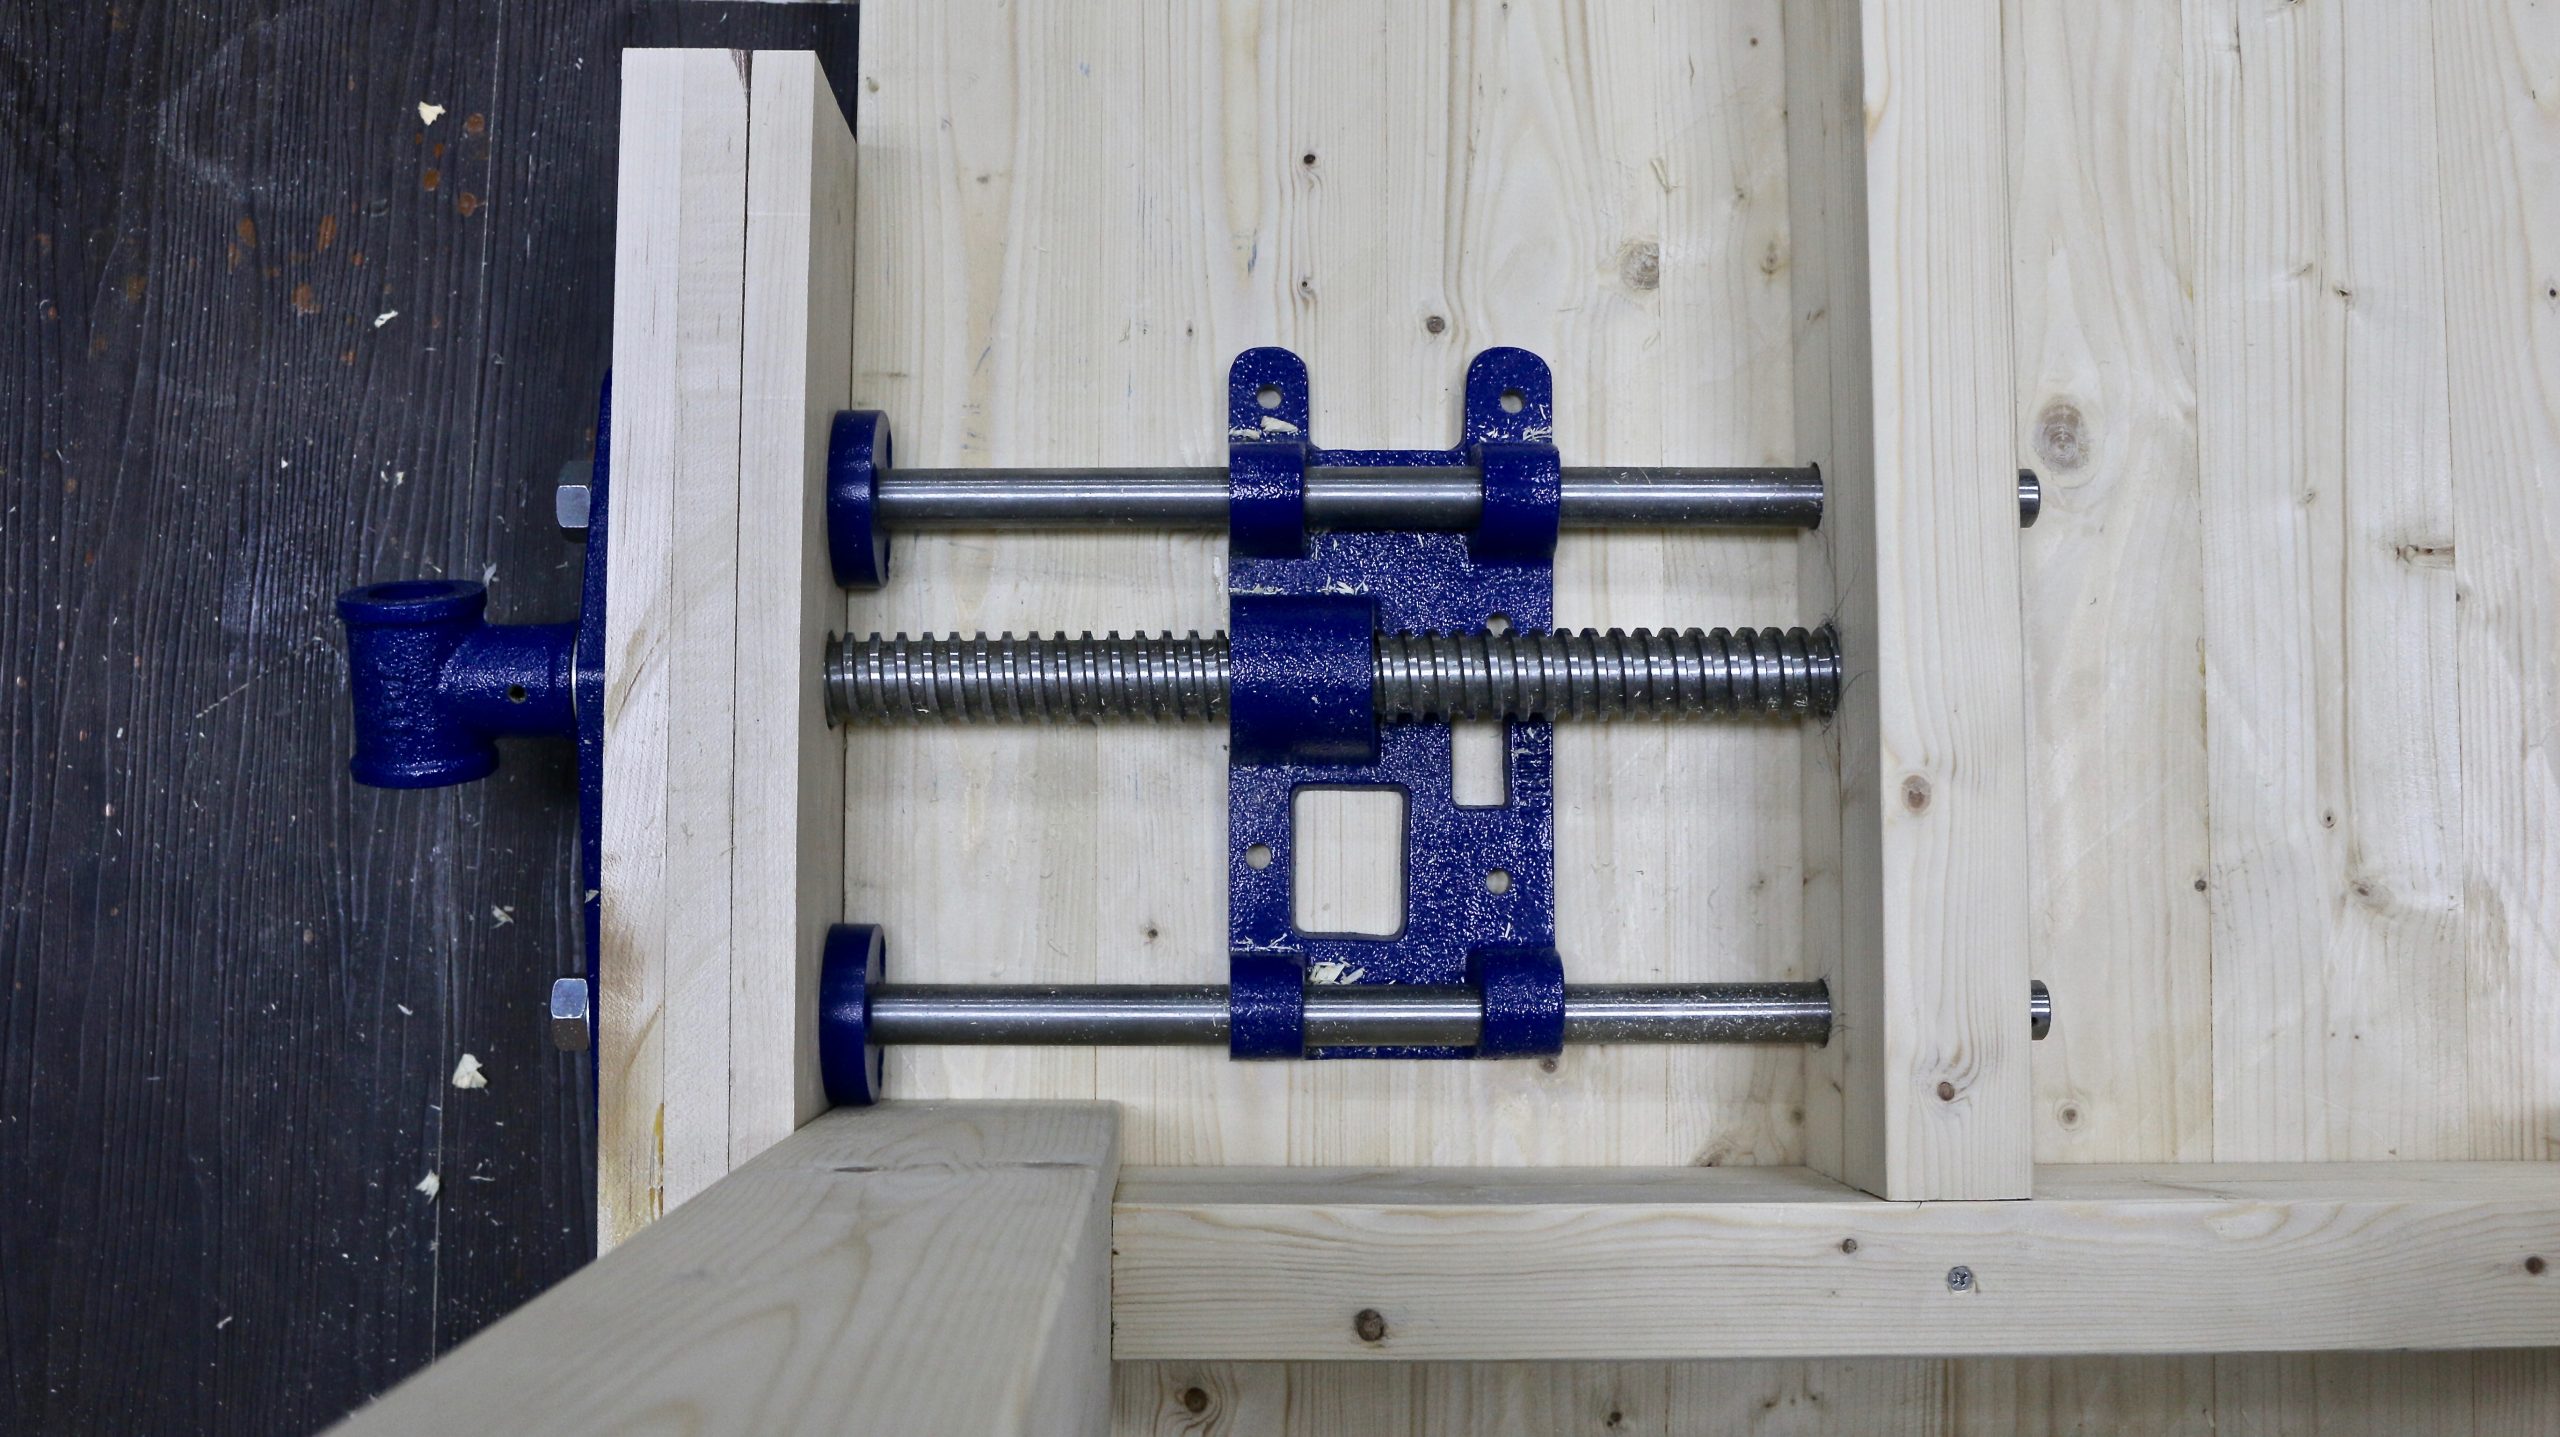 Yost 10-Inch Woodworking Vise Mounting